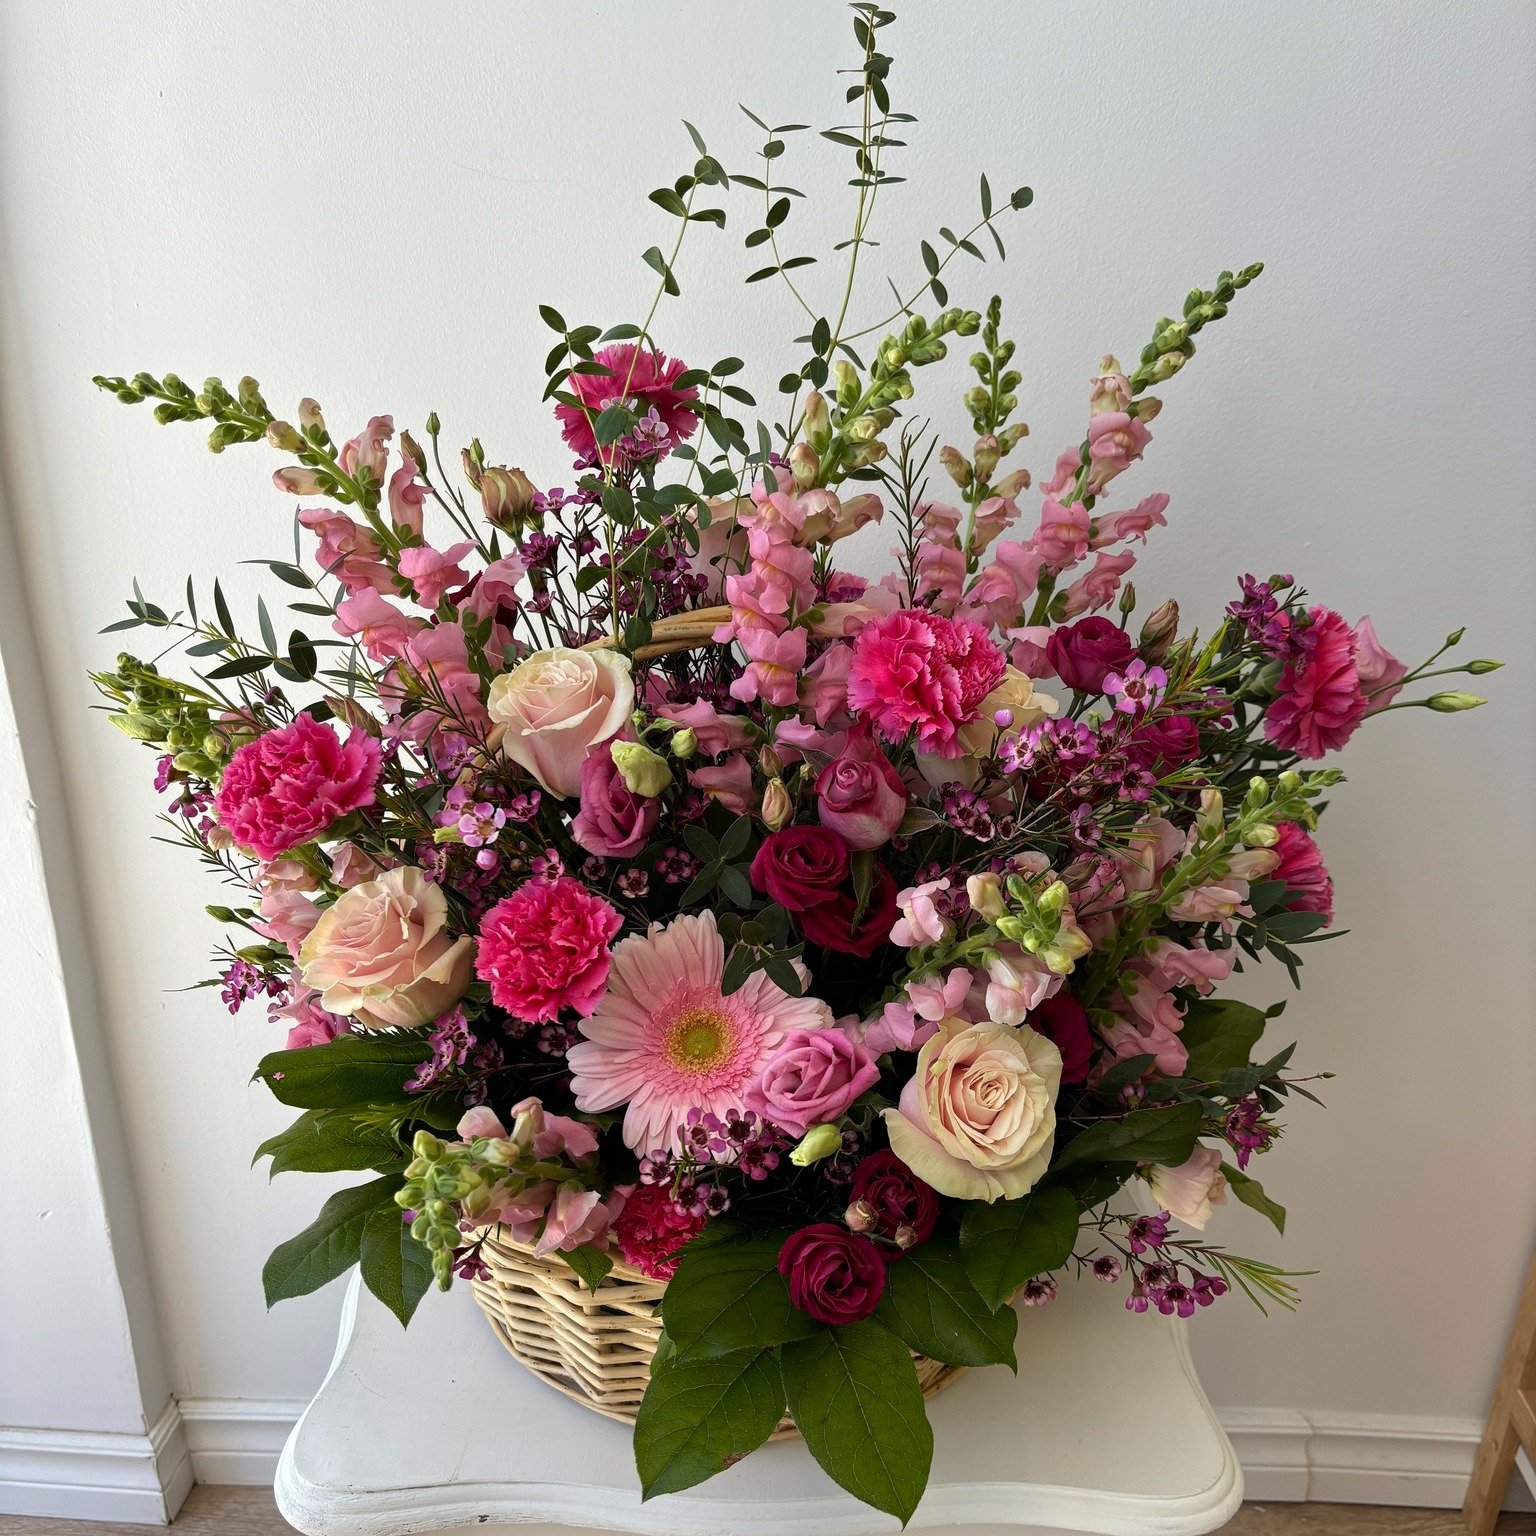 Adding a personal touch to a sympathy arrangement is always special. This basket was created with gardening and favourite colour pink kept in mind.
#sypathyflowers #Florist #deliveryservice